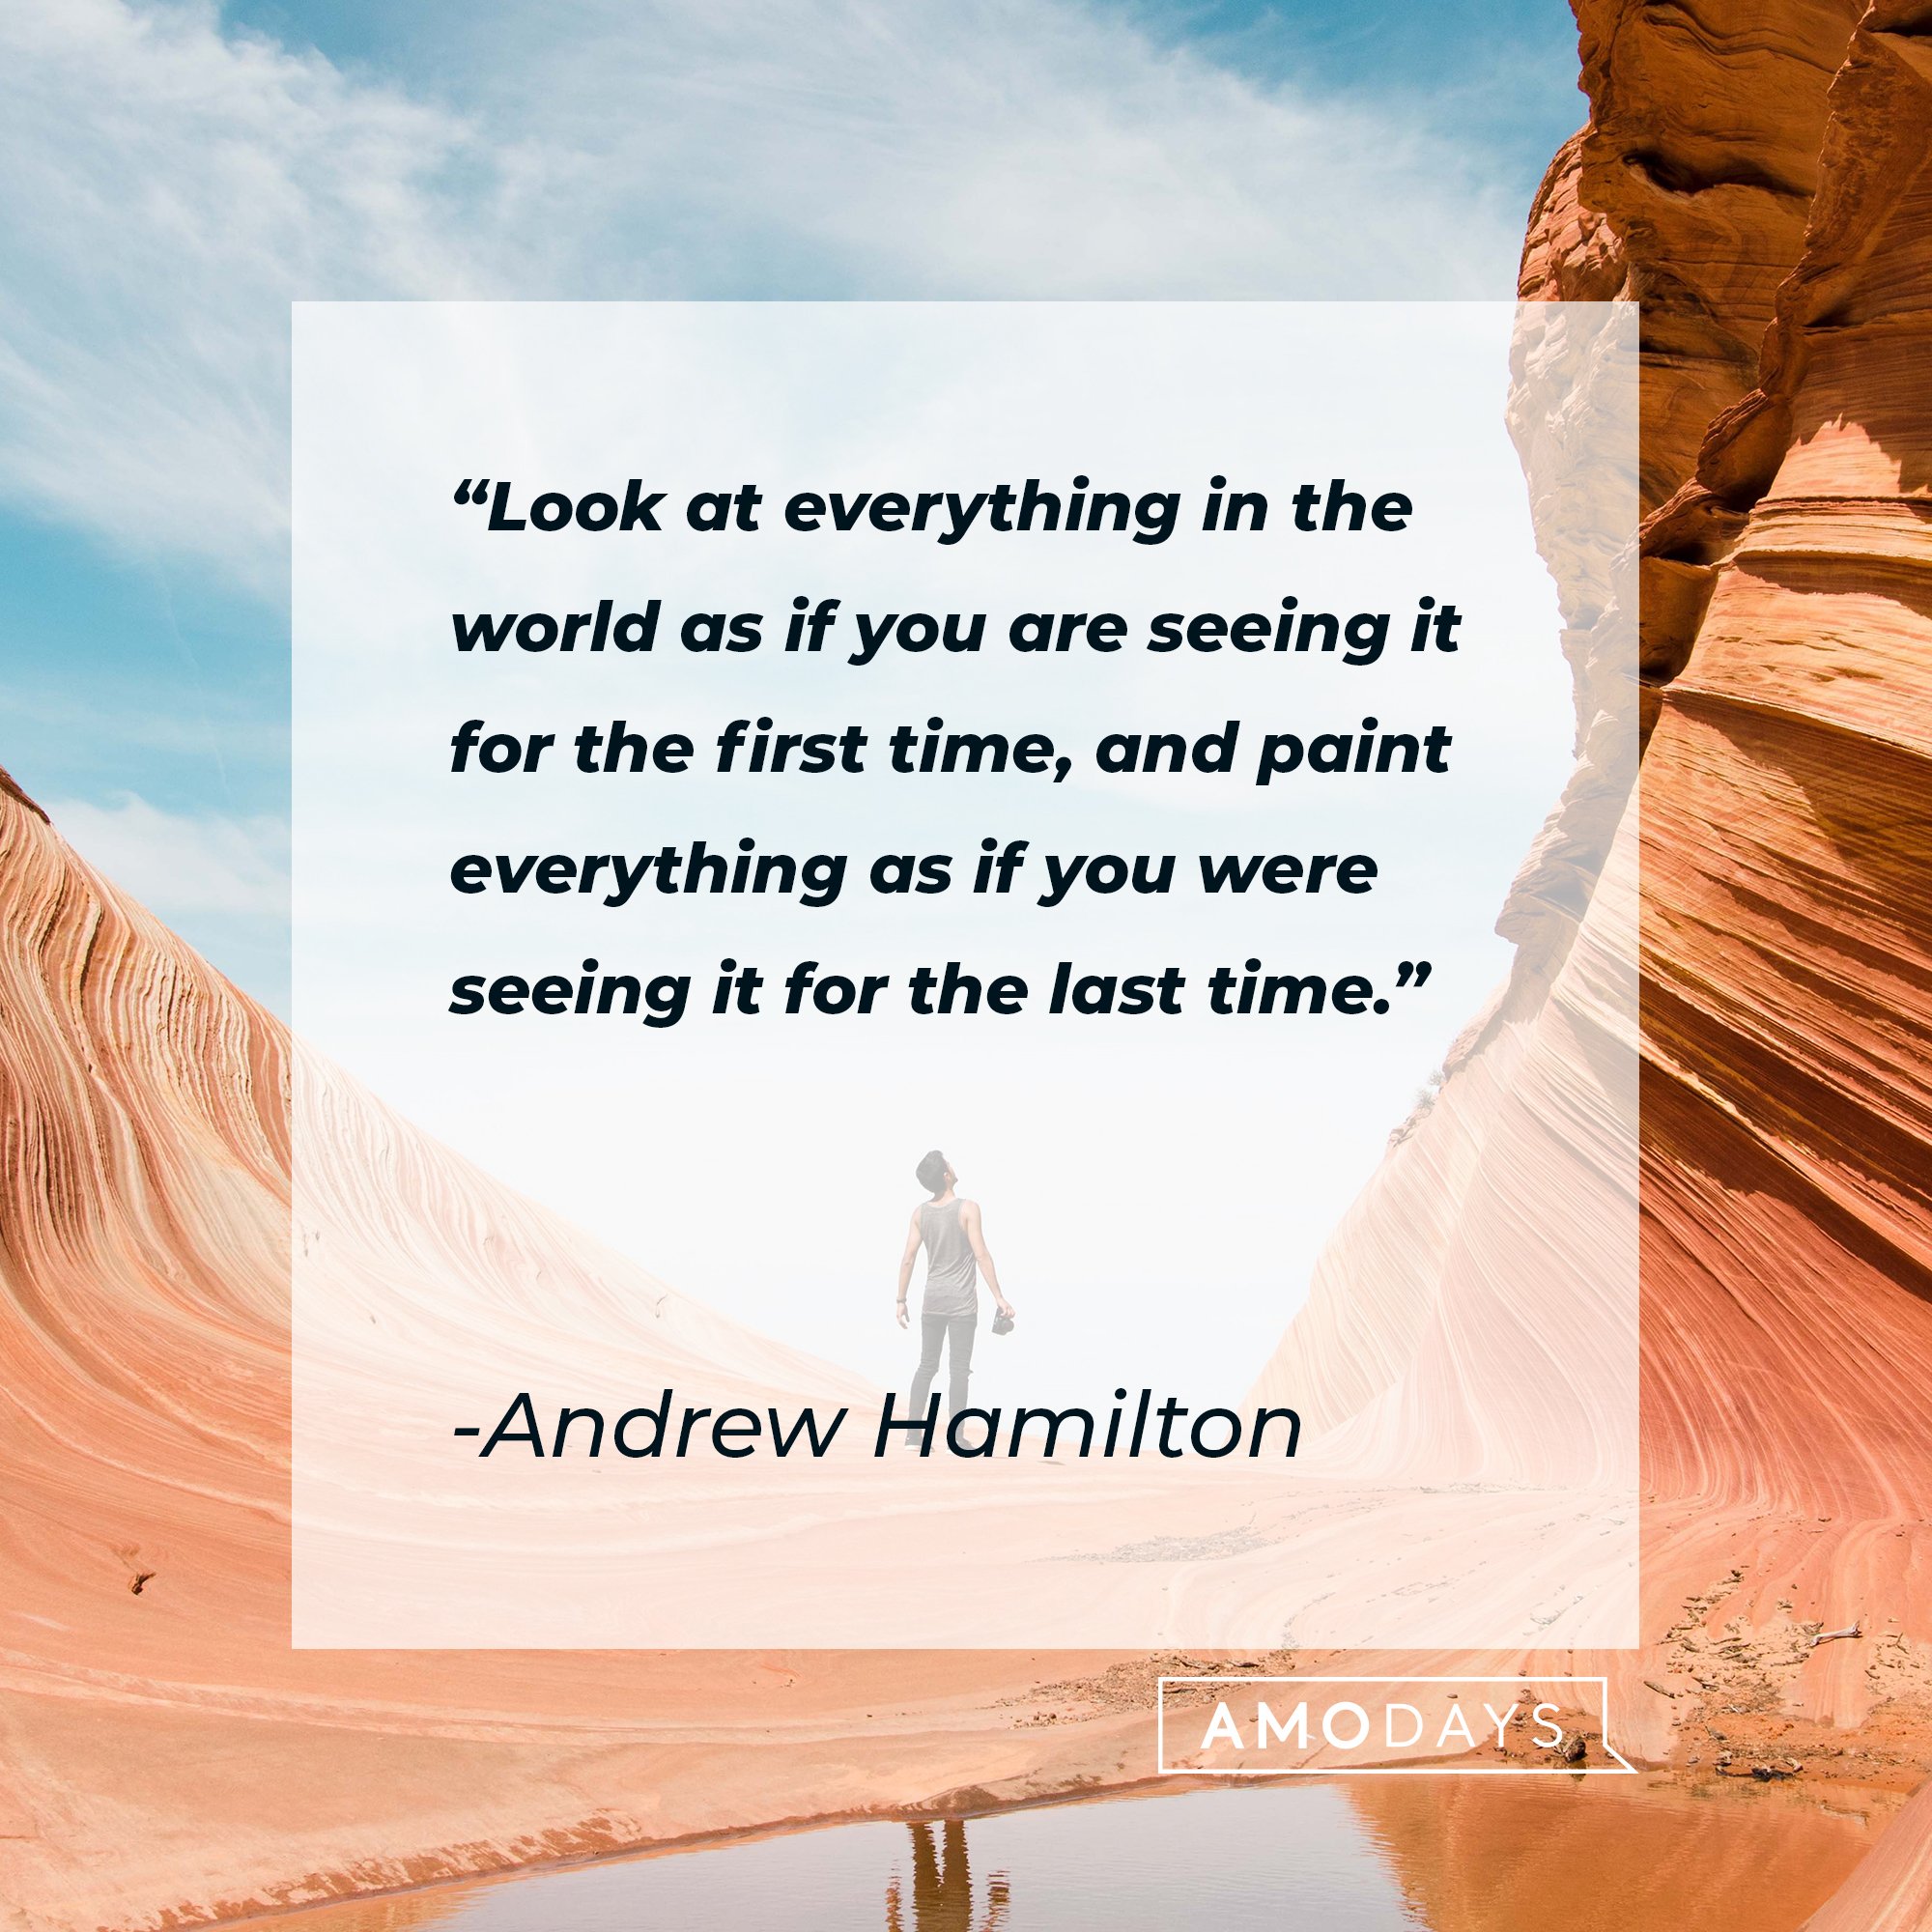 Andrew Hamilton’s quote: "Look at everything in the world as if you are seeing it for the first time, and paint everything as if you were seeing it for the last time." | Image: AmoDays